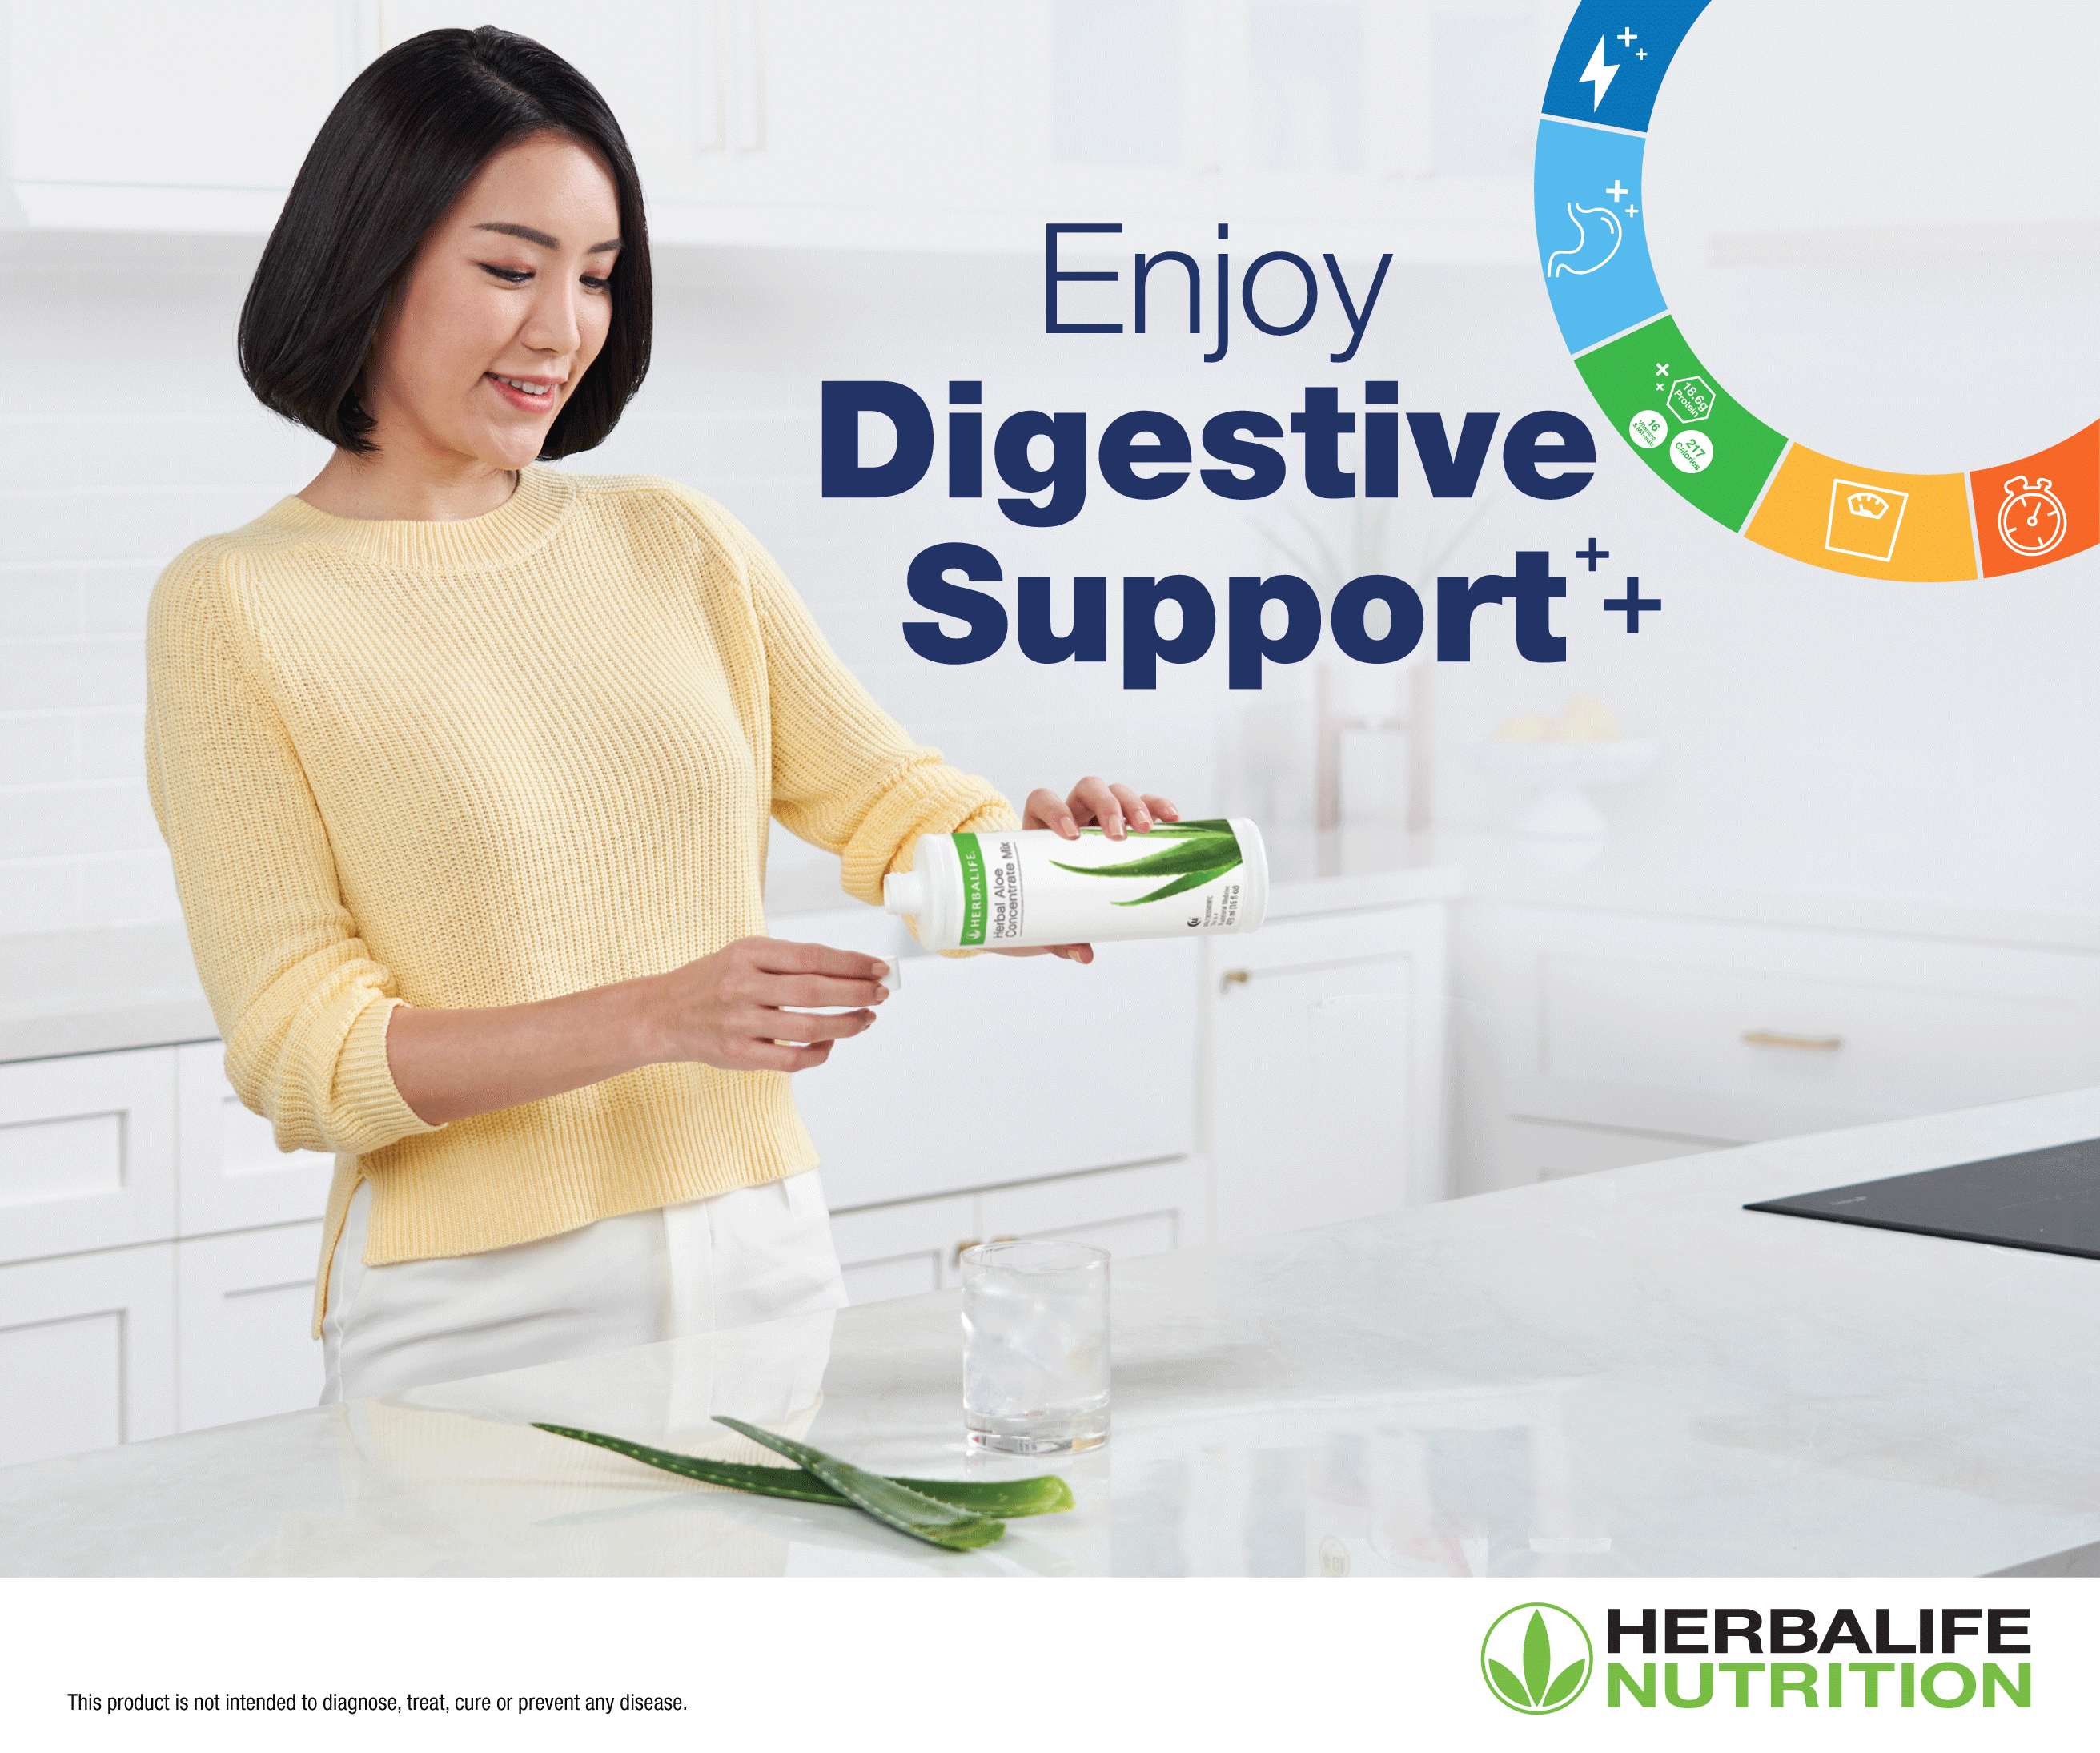 Enjoy healthy digestion support and make Herbalife Nutrition Healthy Breakfast your morning routine today. 